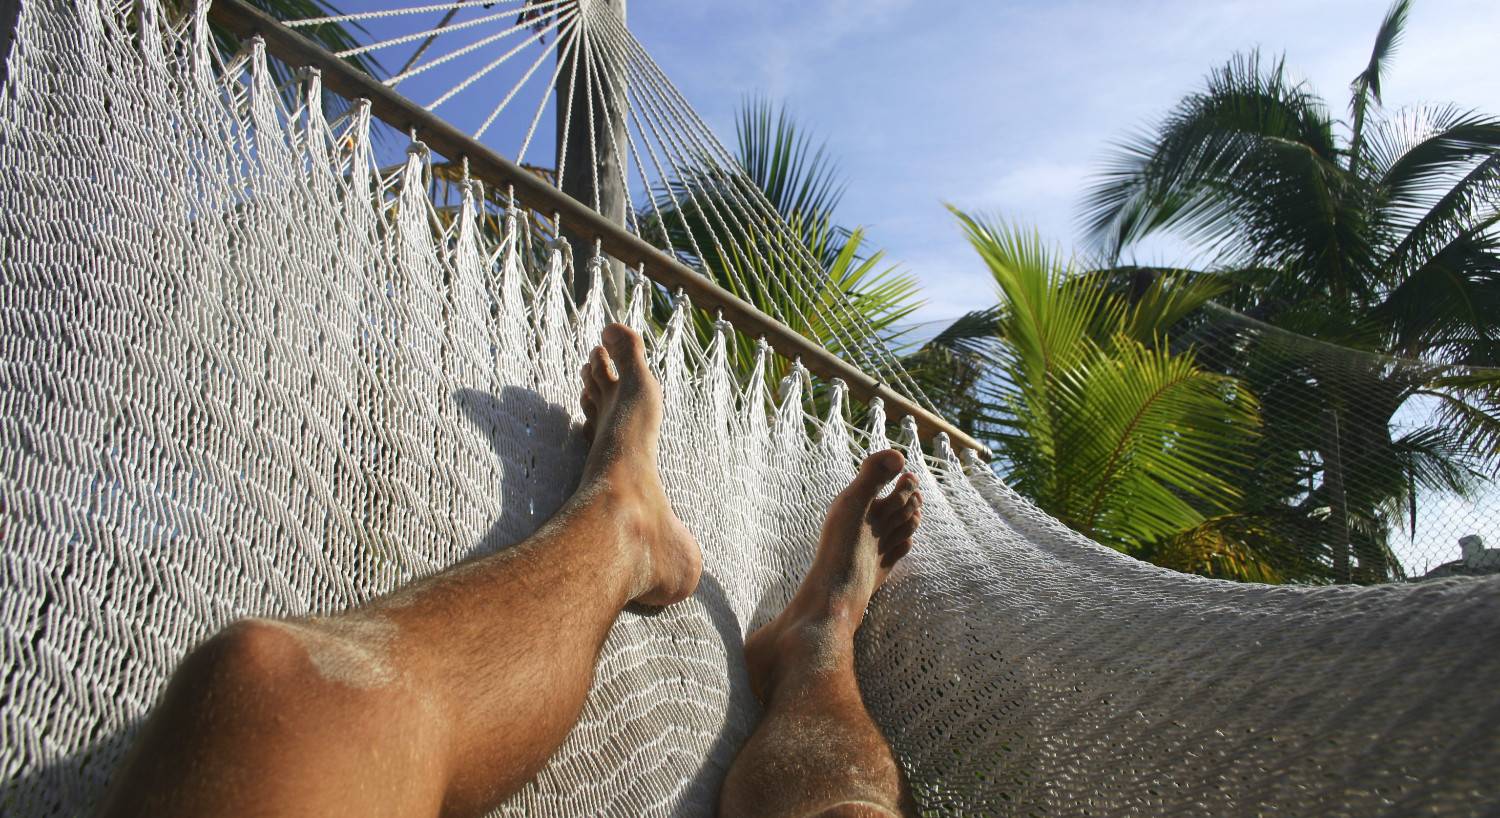 A man's tanned legs relax on a rope hammock under palm trees. 